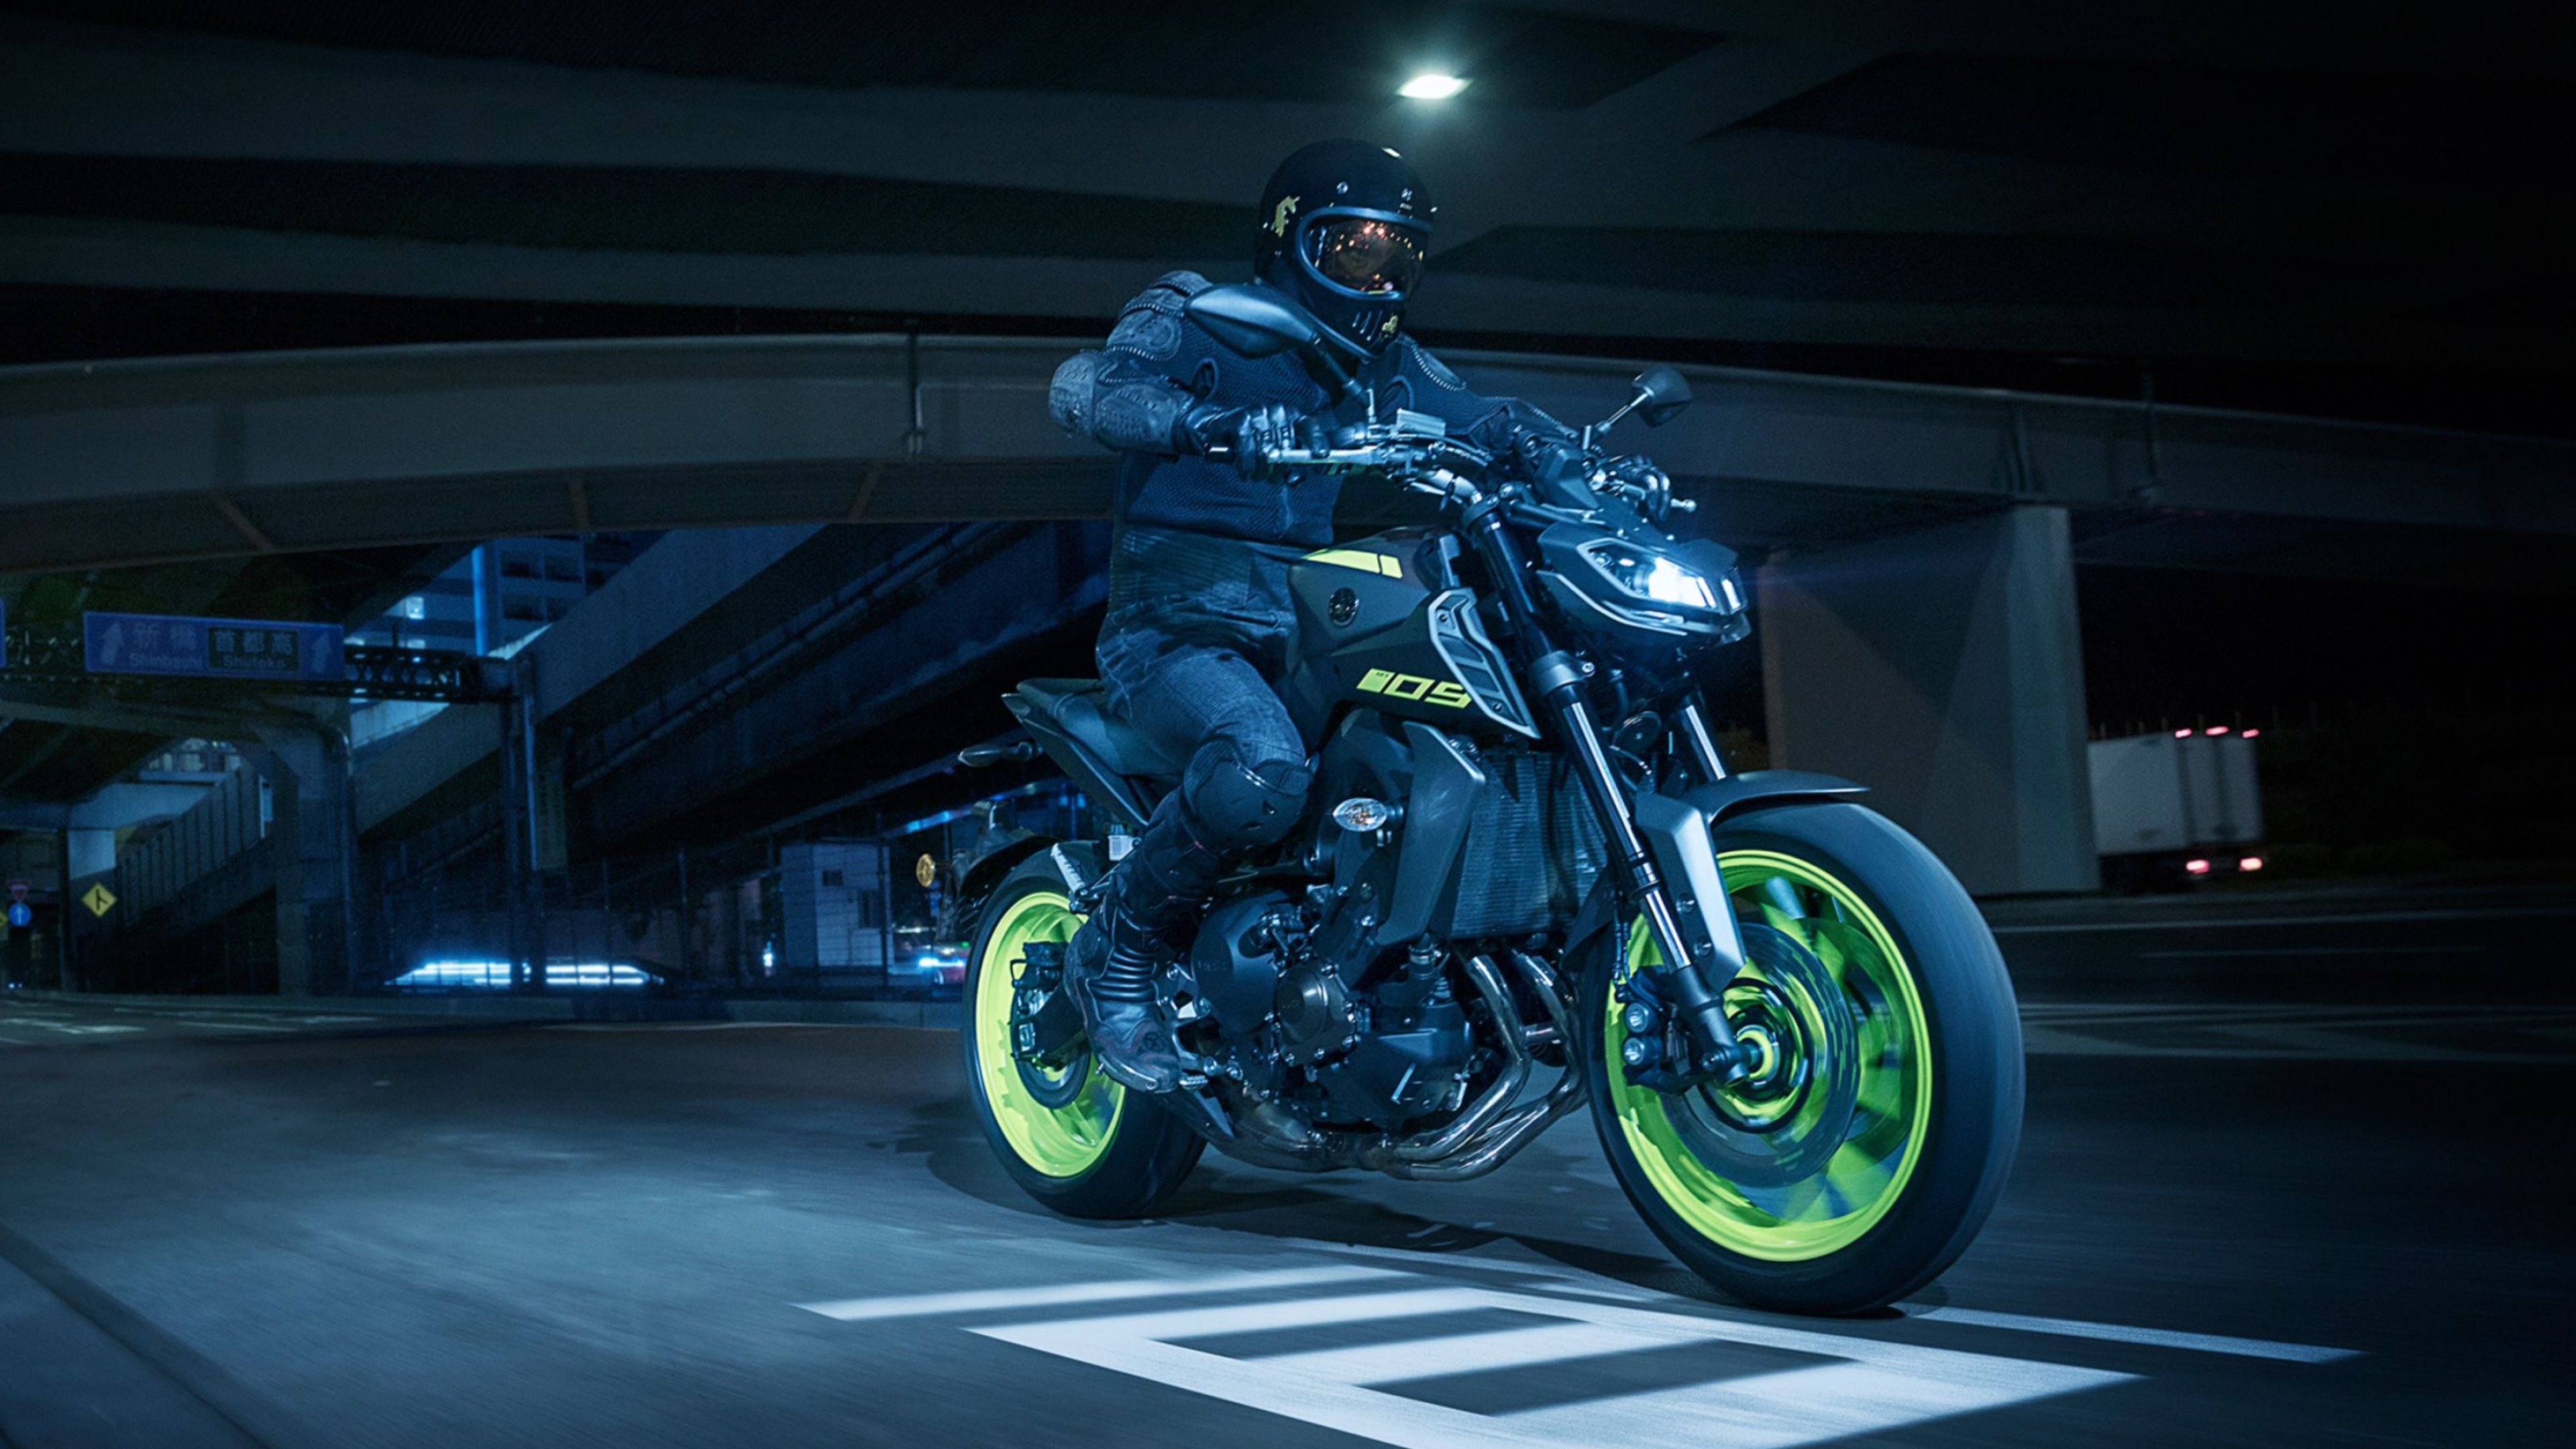 Yamaha MT-09 Auto, Dominant road presence, Thrilling riding experience, Unmatched power, 3840x2160 4K Desktop